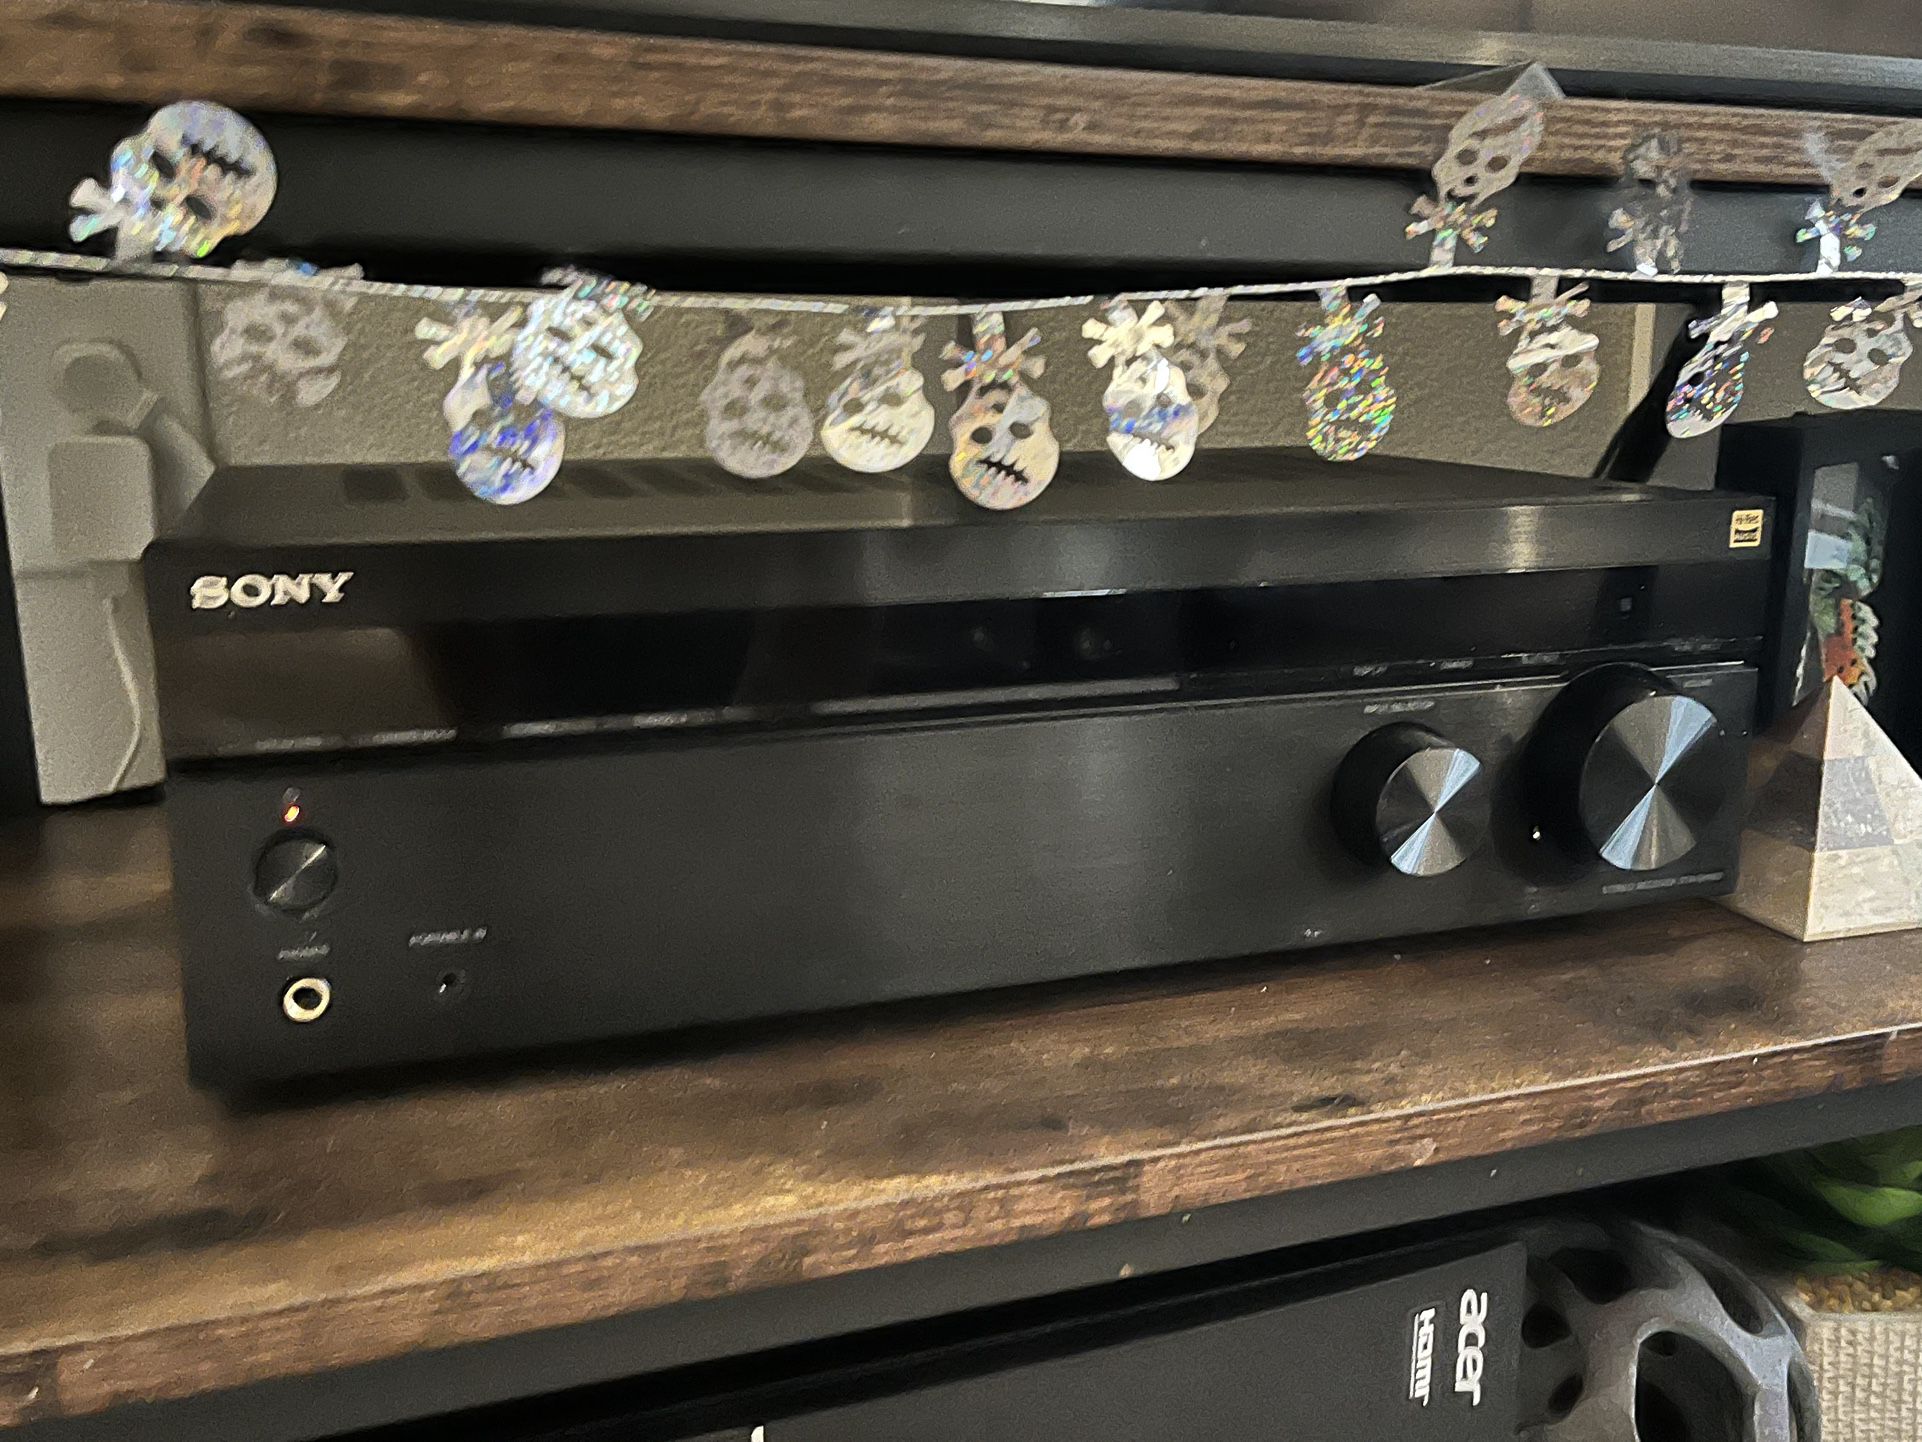 Sony Audio System Speakers and Receiver